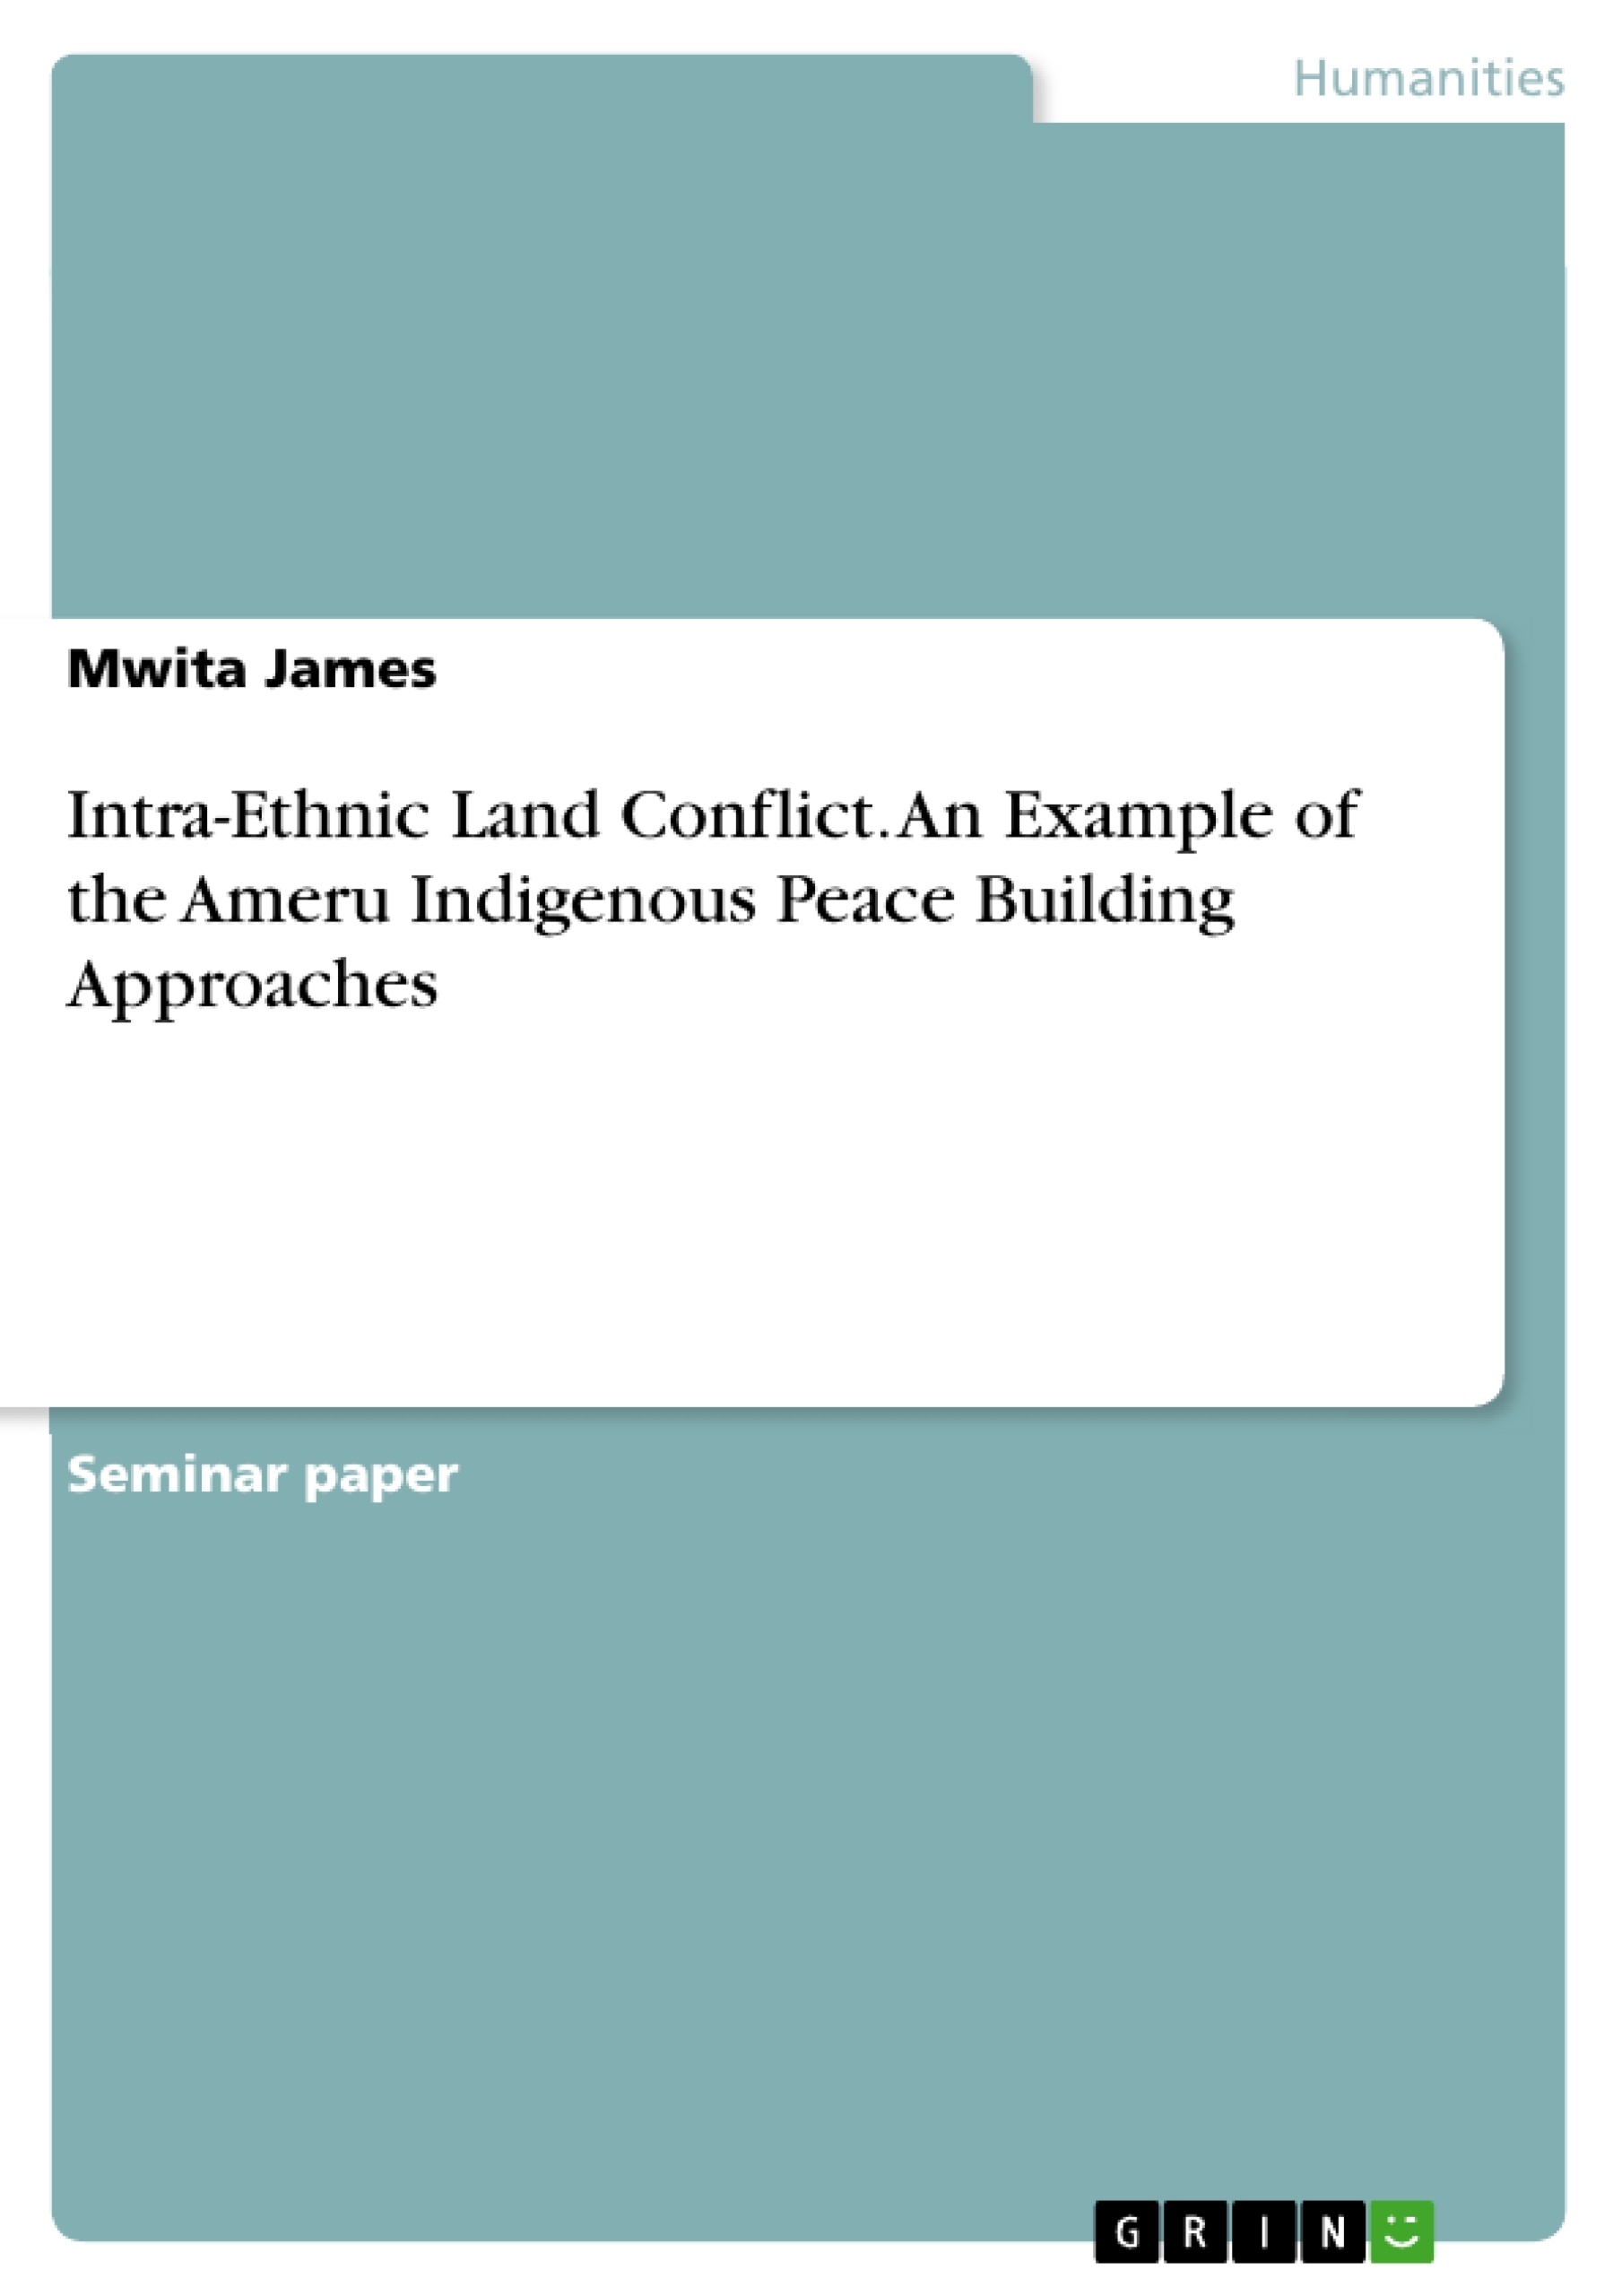 Titre: Intra-Ethnic Land Conflict. An Example of the Ameru Indigenous Peace Building Approaches